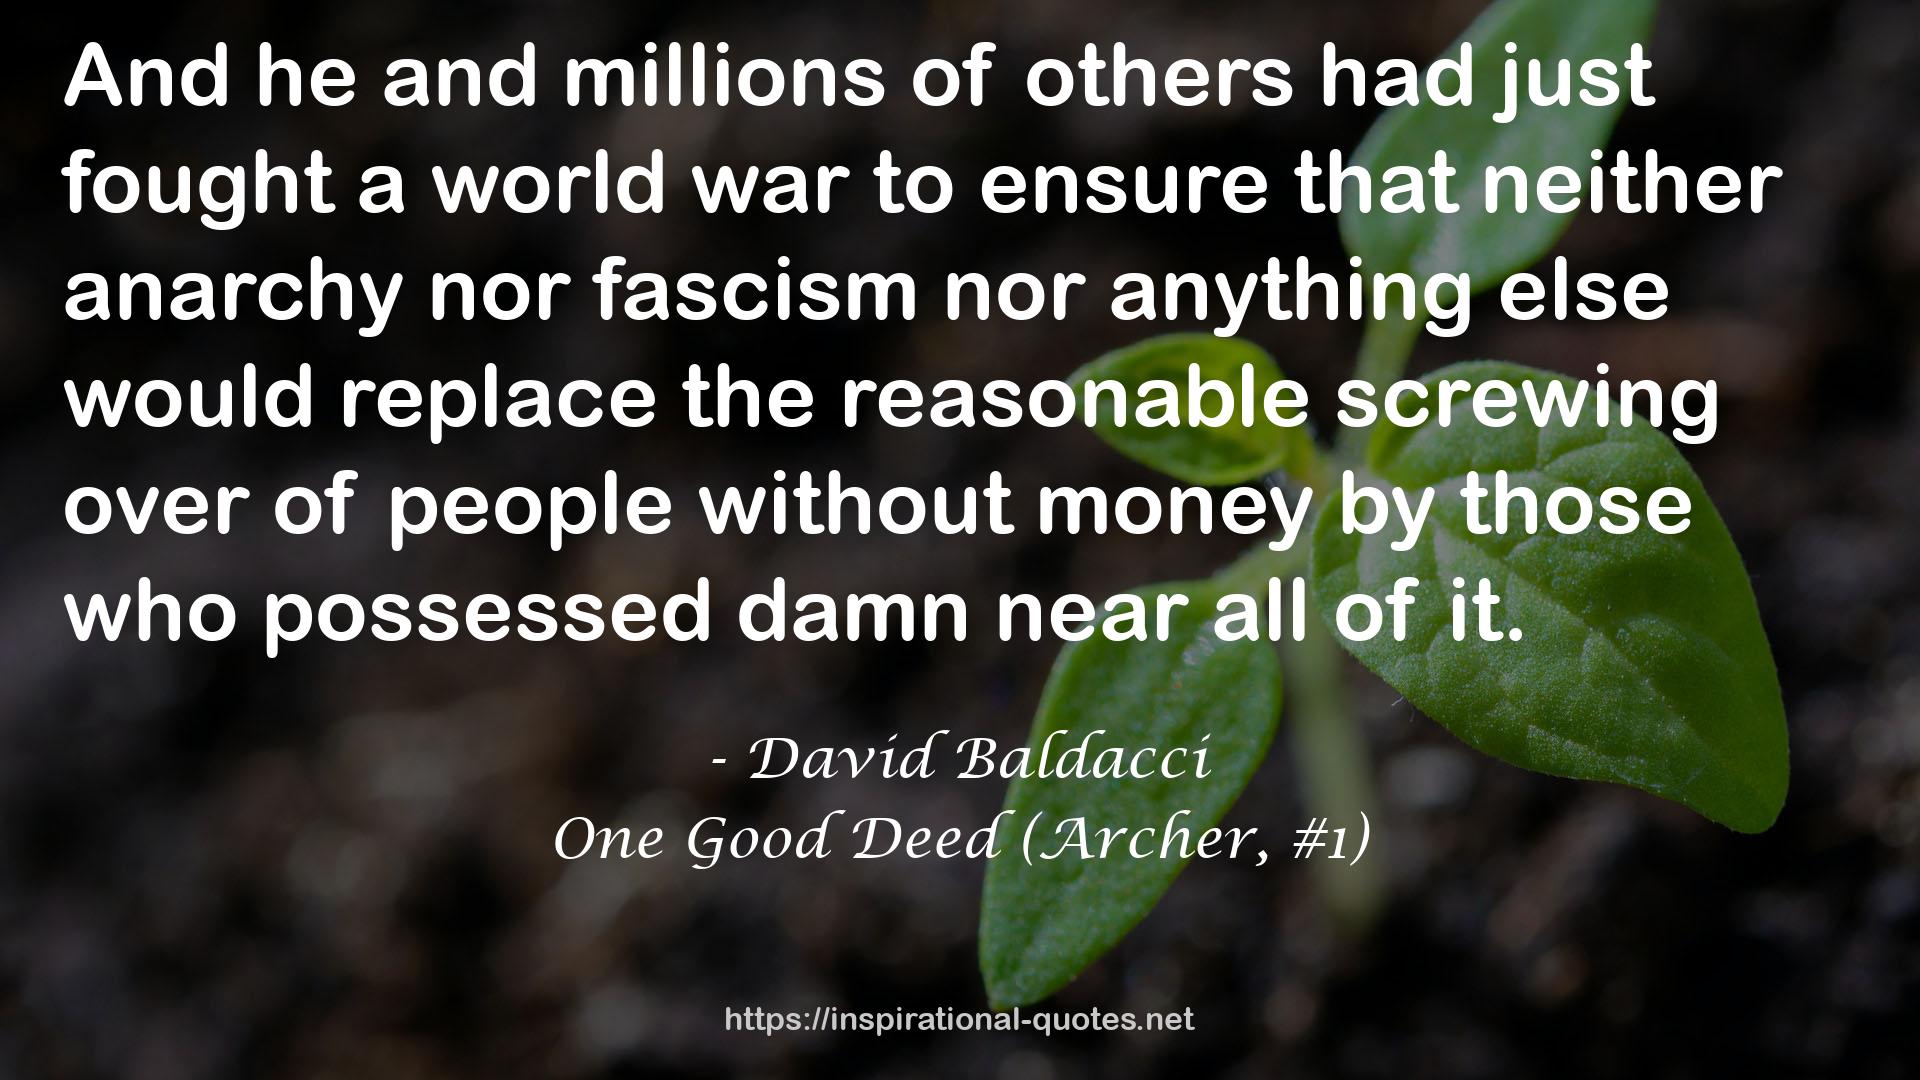 One Good Deed (Archer, #1) QUOTES